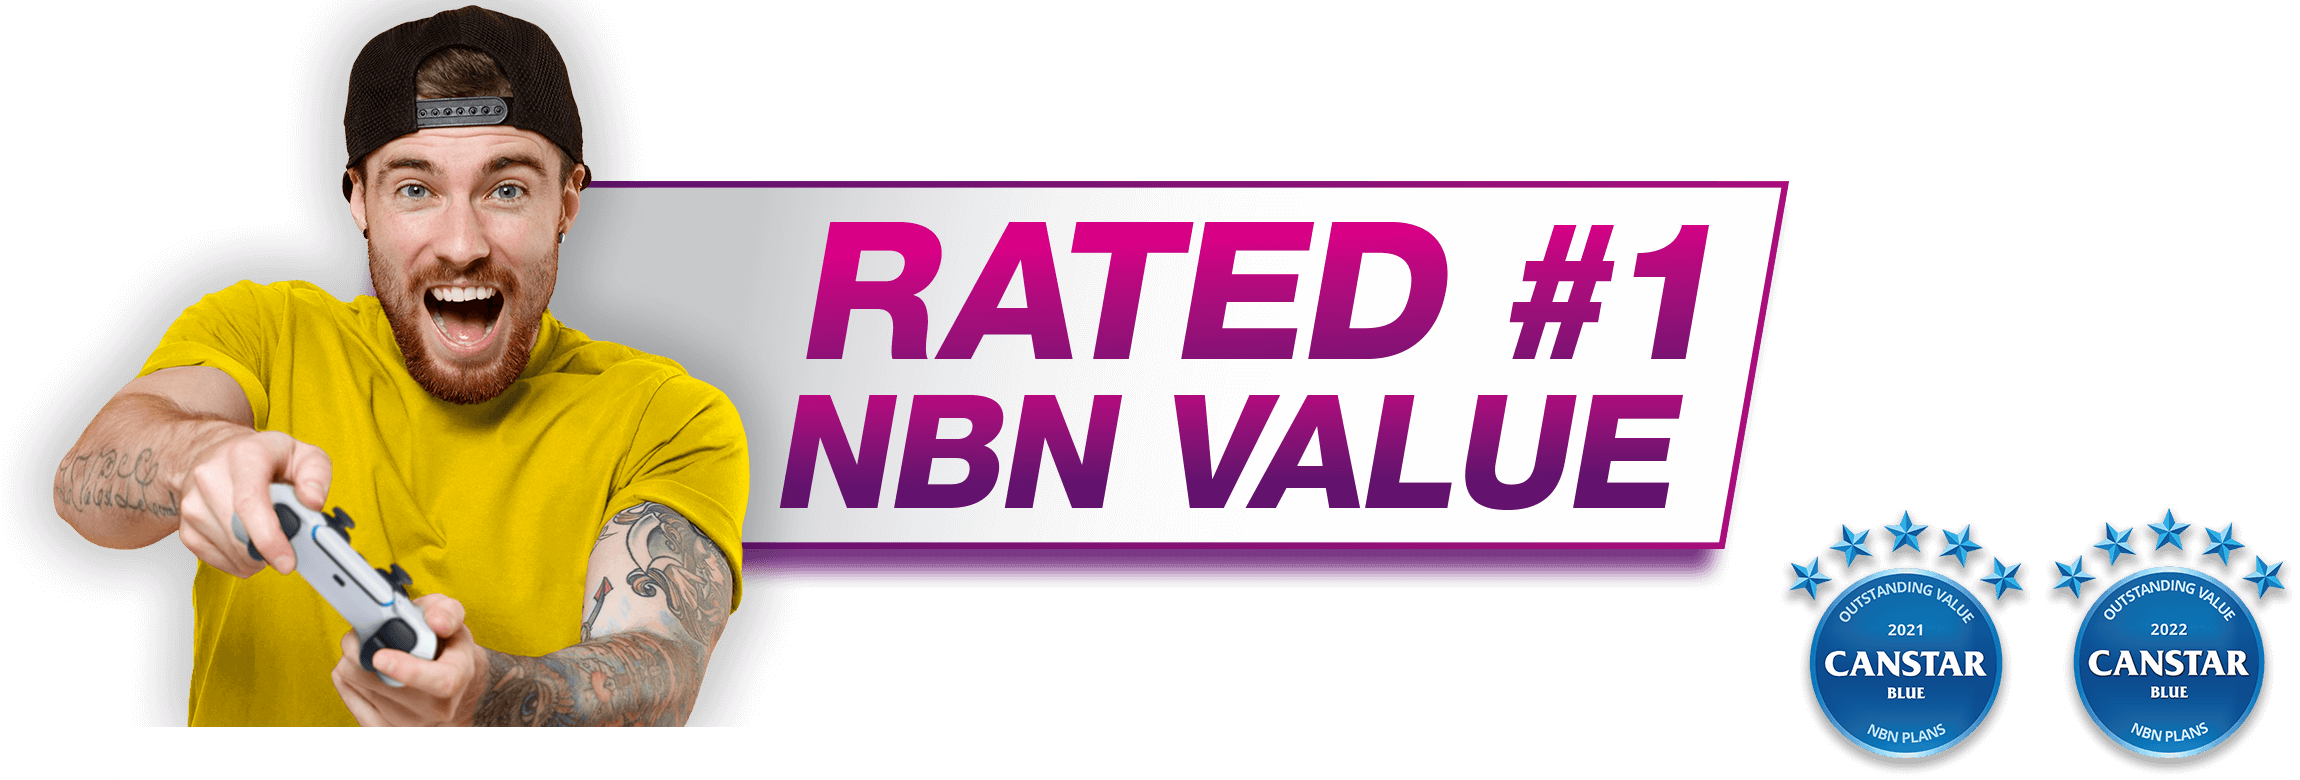 Rated #1 NBN Value